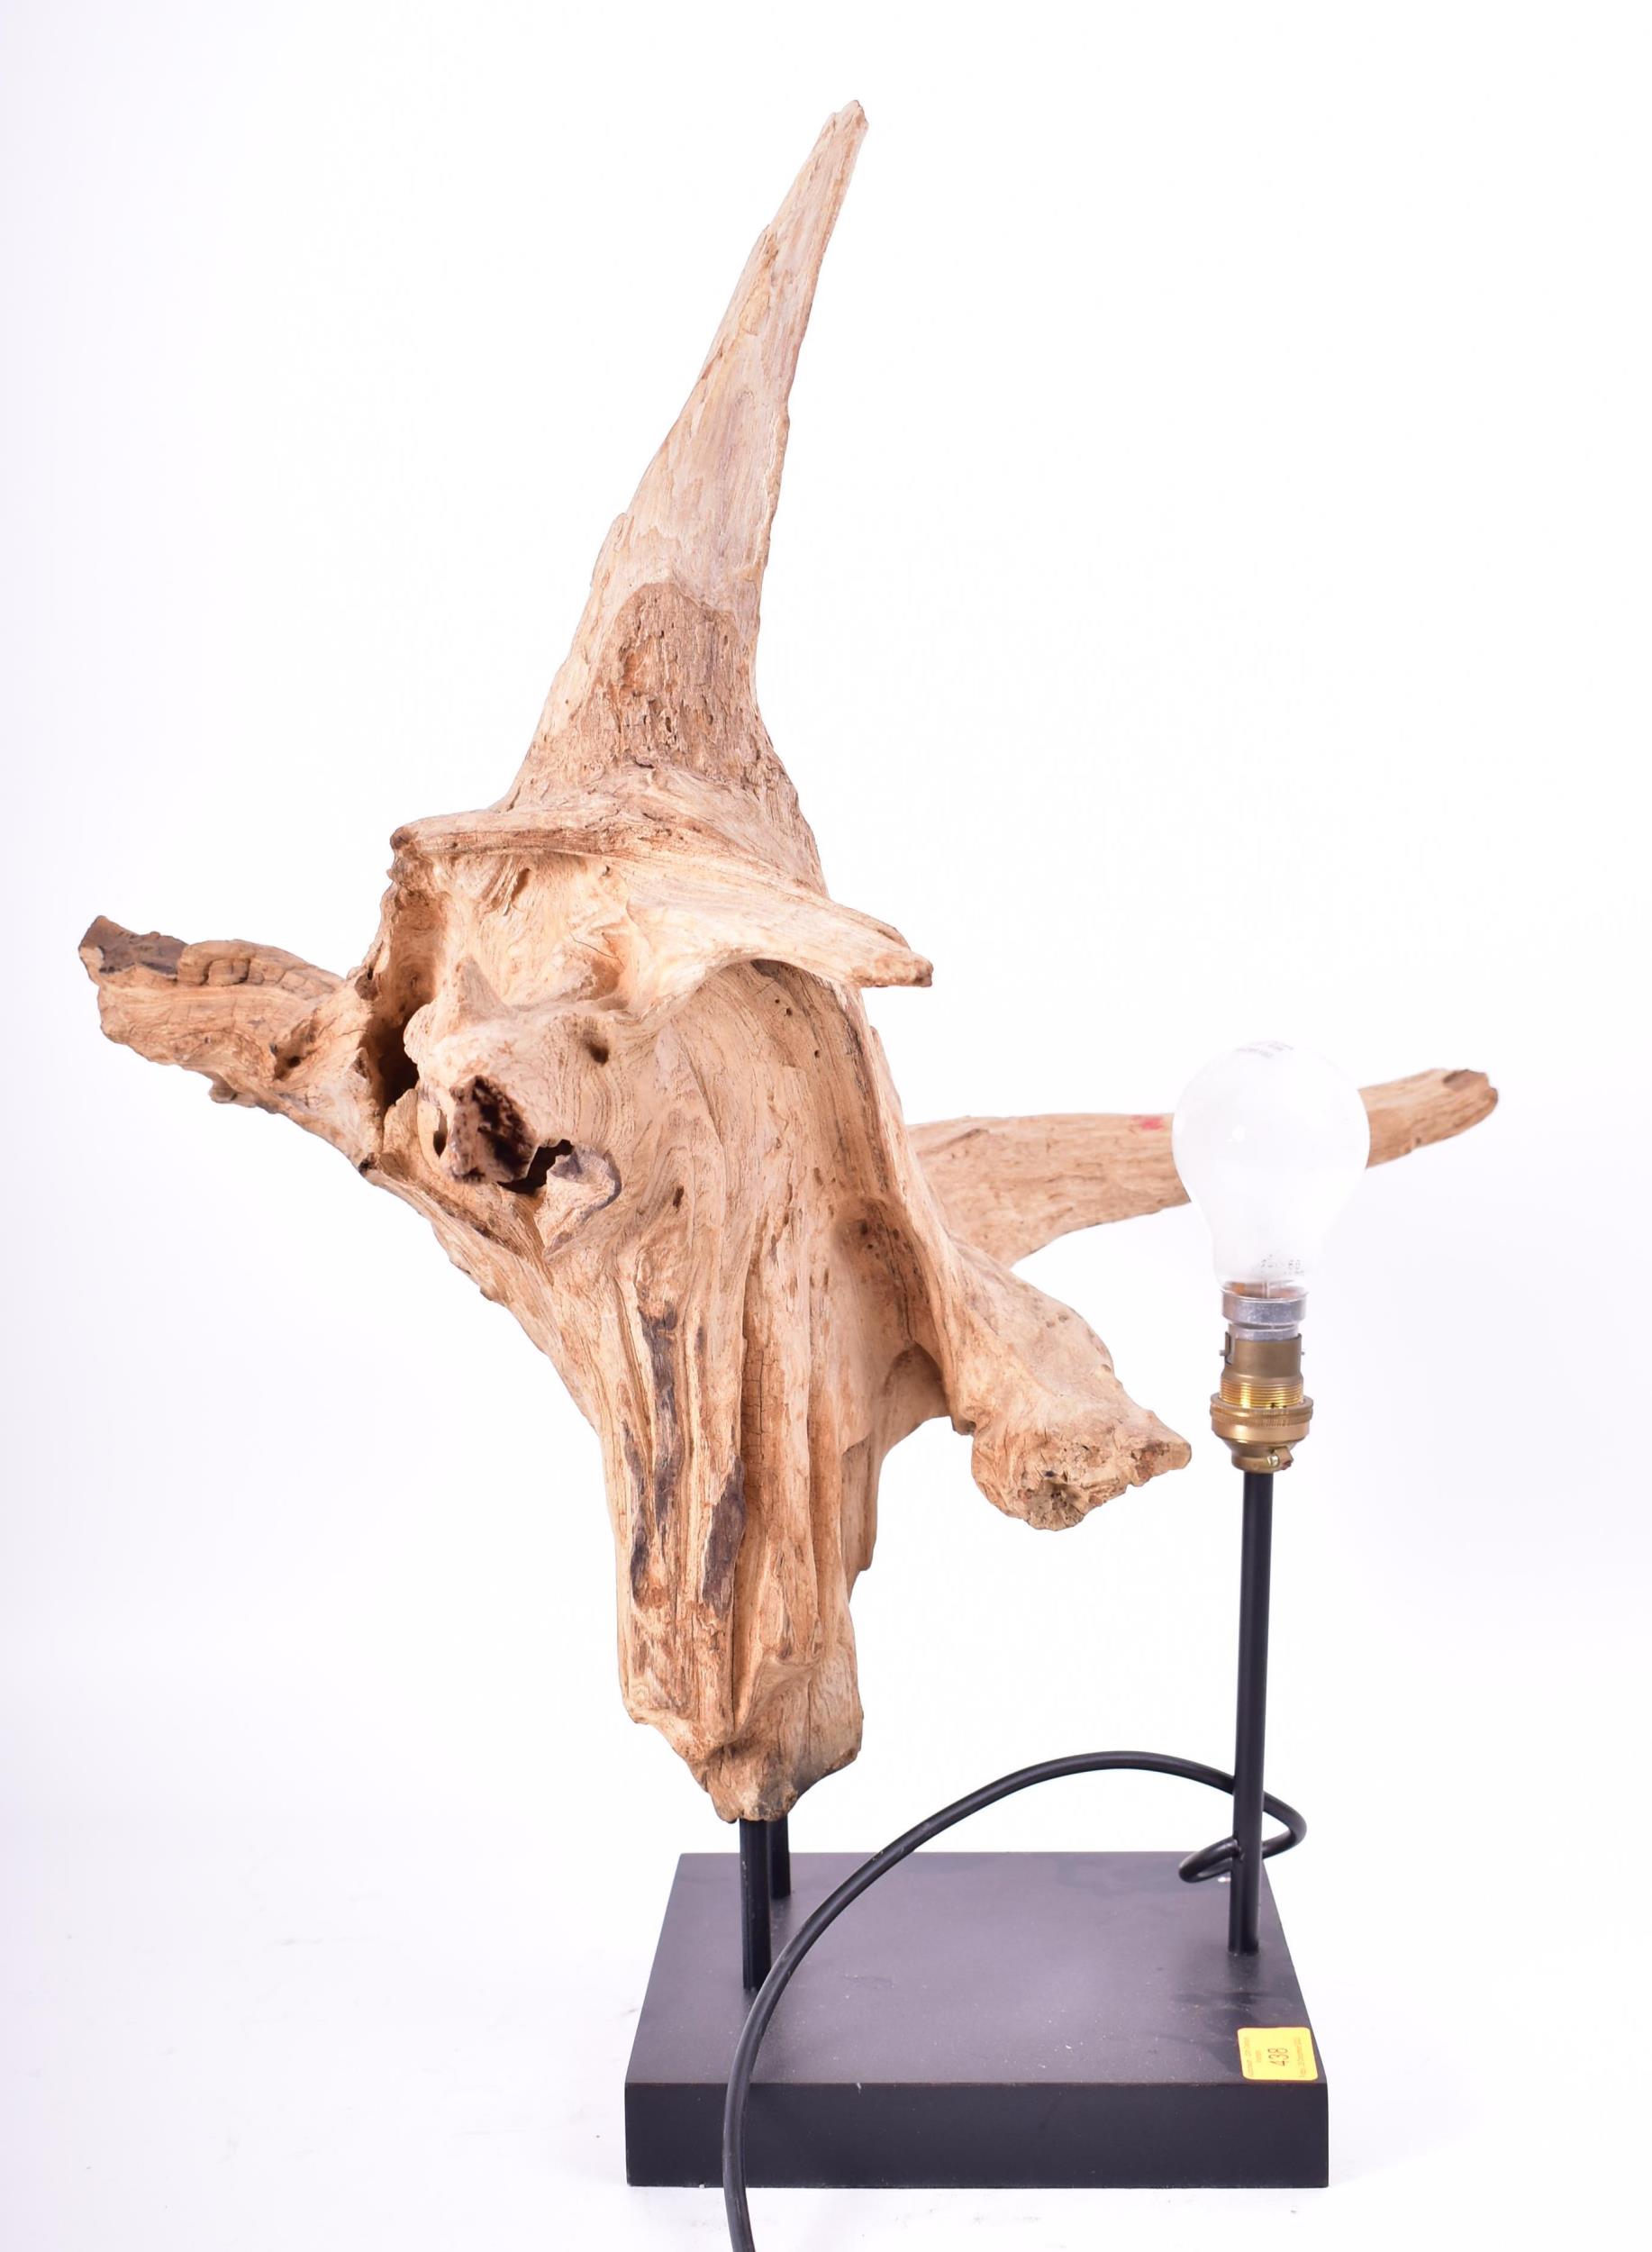 CONTEMPORARY DRIFTWOOD TABLE LAMP